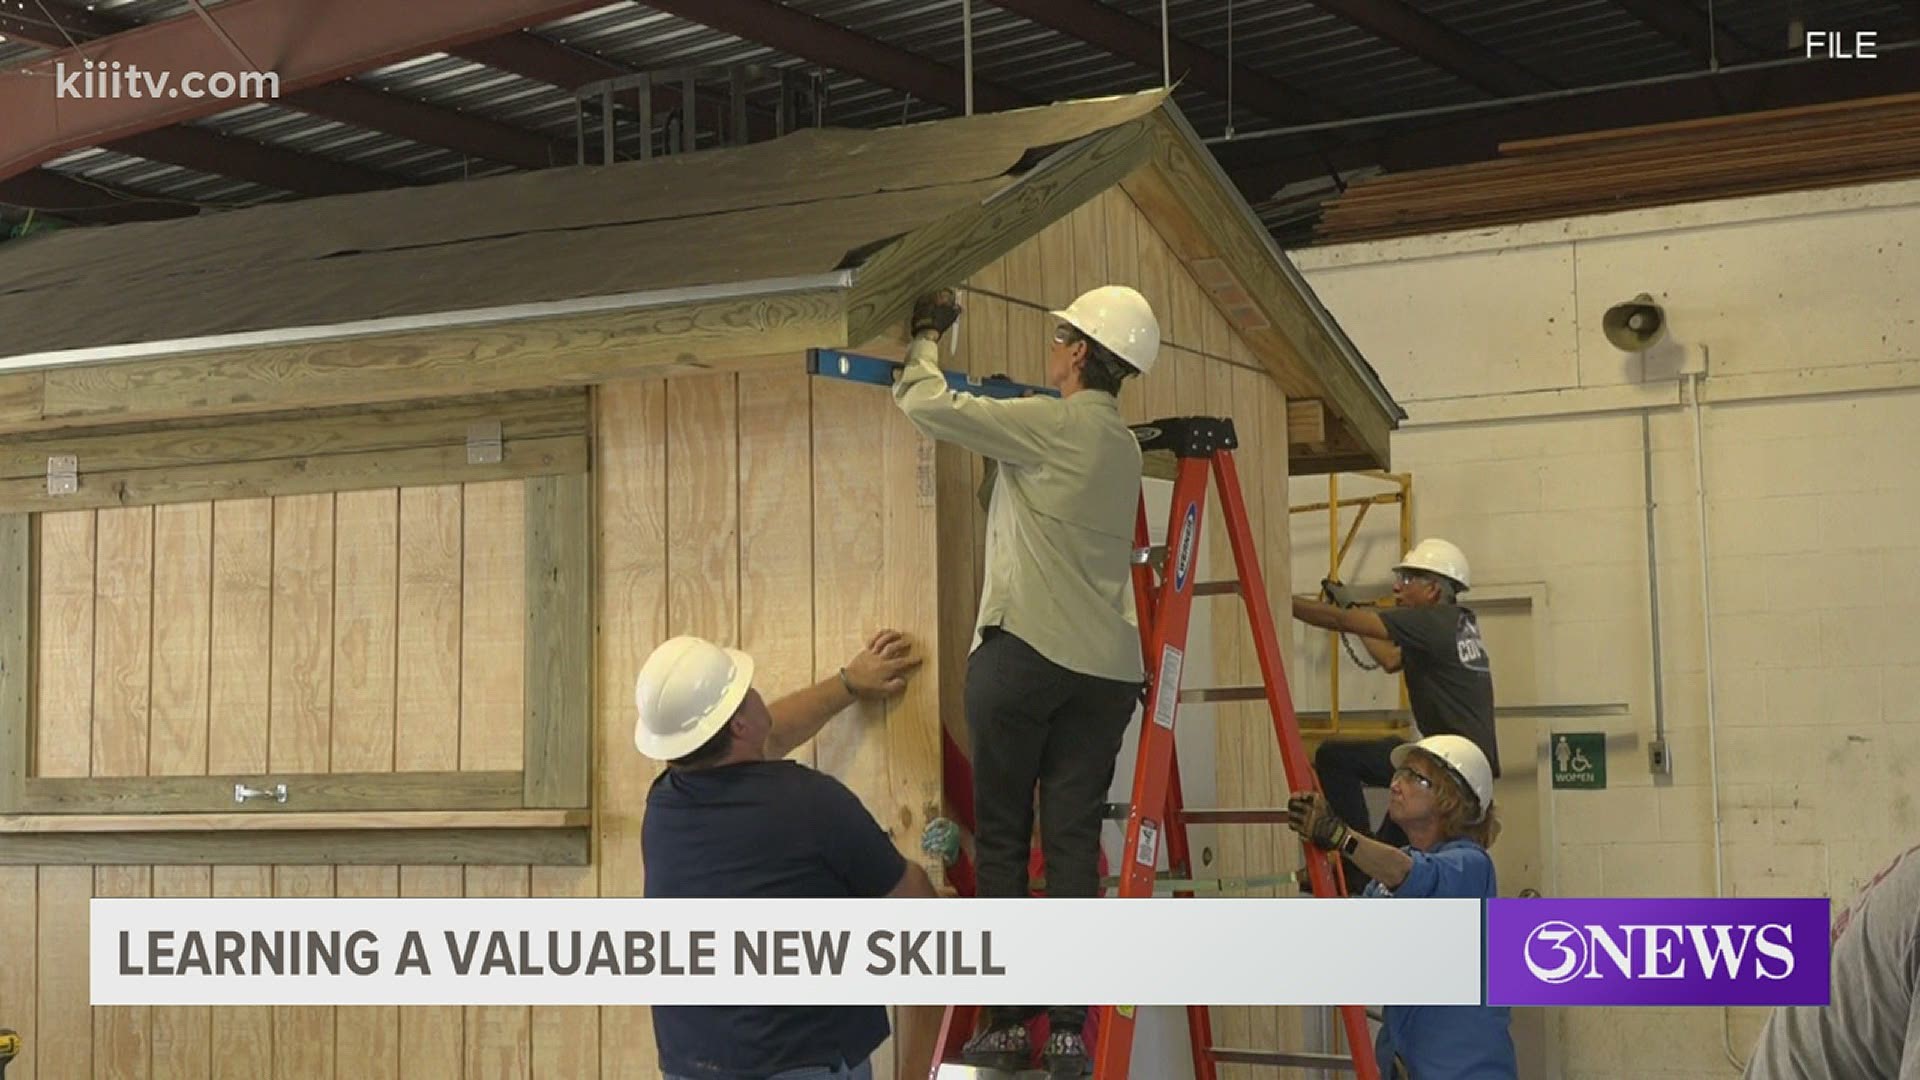 The program is a follow-up to the popular ‘Rebuild Texas’ training program that taught carpentry skills to so many in our community in the aftermath of Harvey.